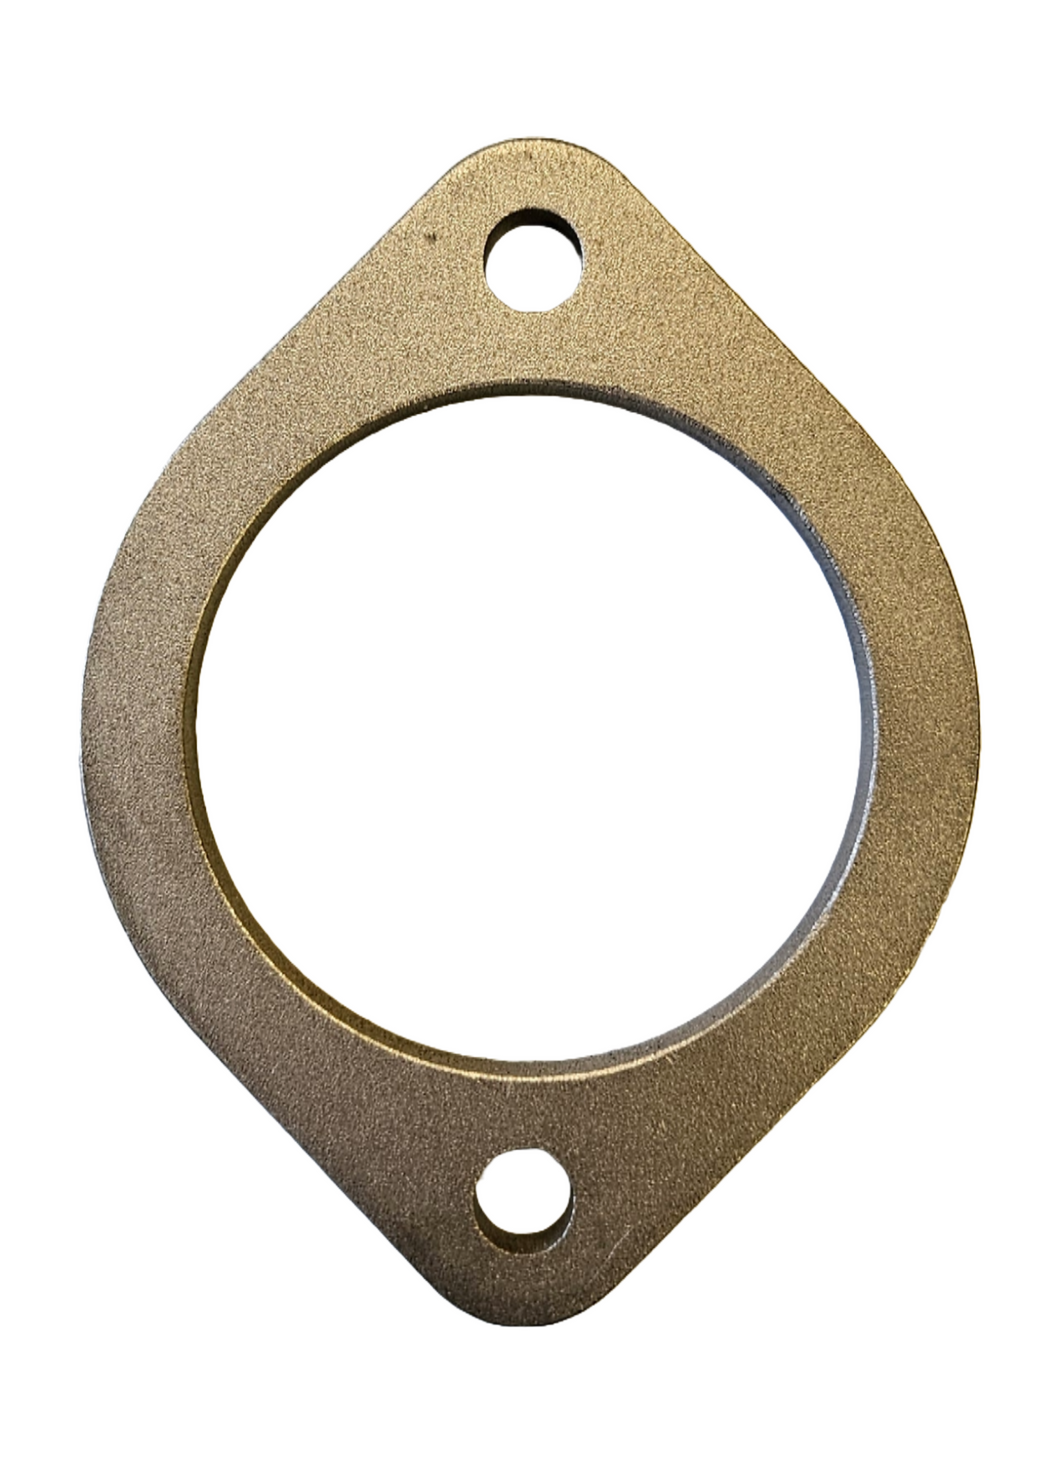 2 Bolt Stainless Steel Universal Flange Plate